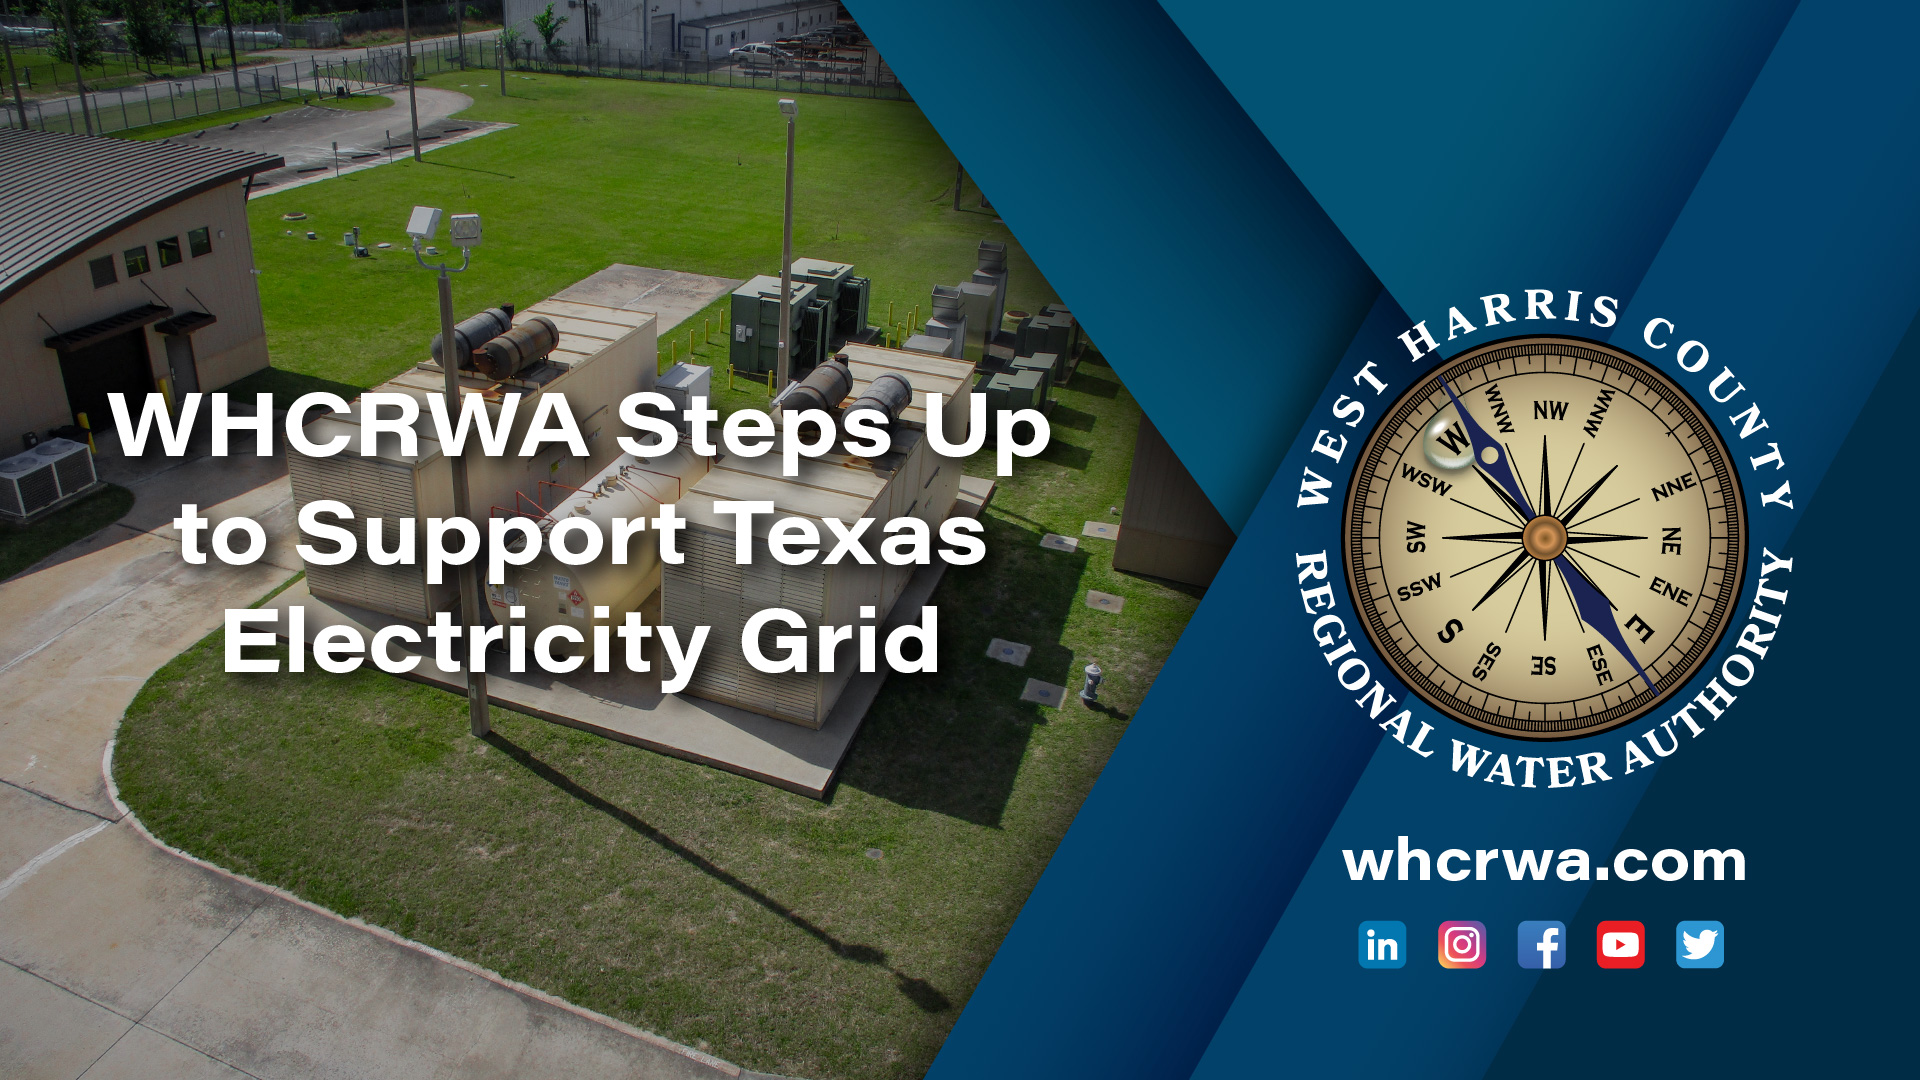 West Harris County Regional Water Authority (WHCRWA) Steps Up to Support Texas Electricity Grid